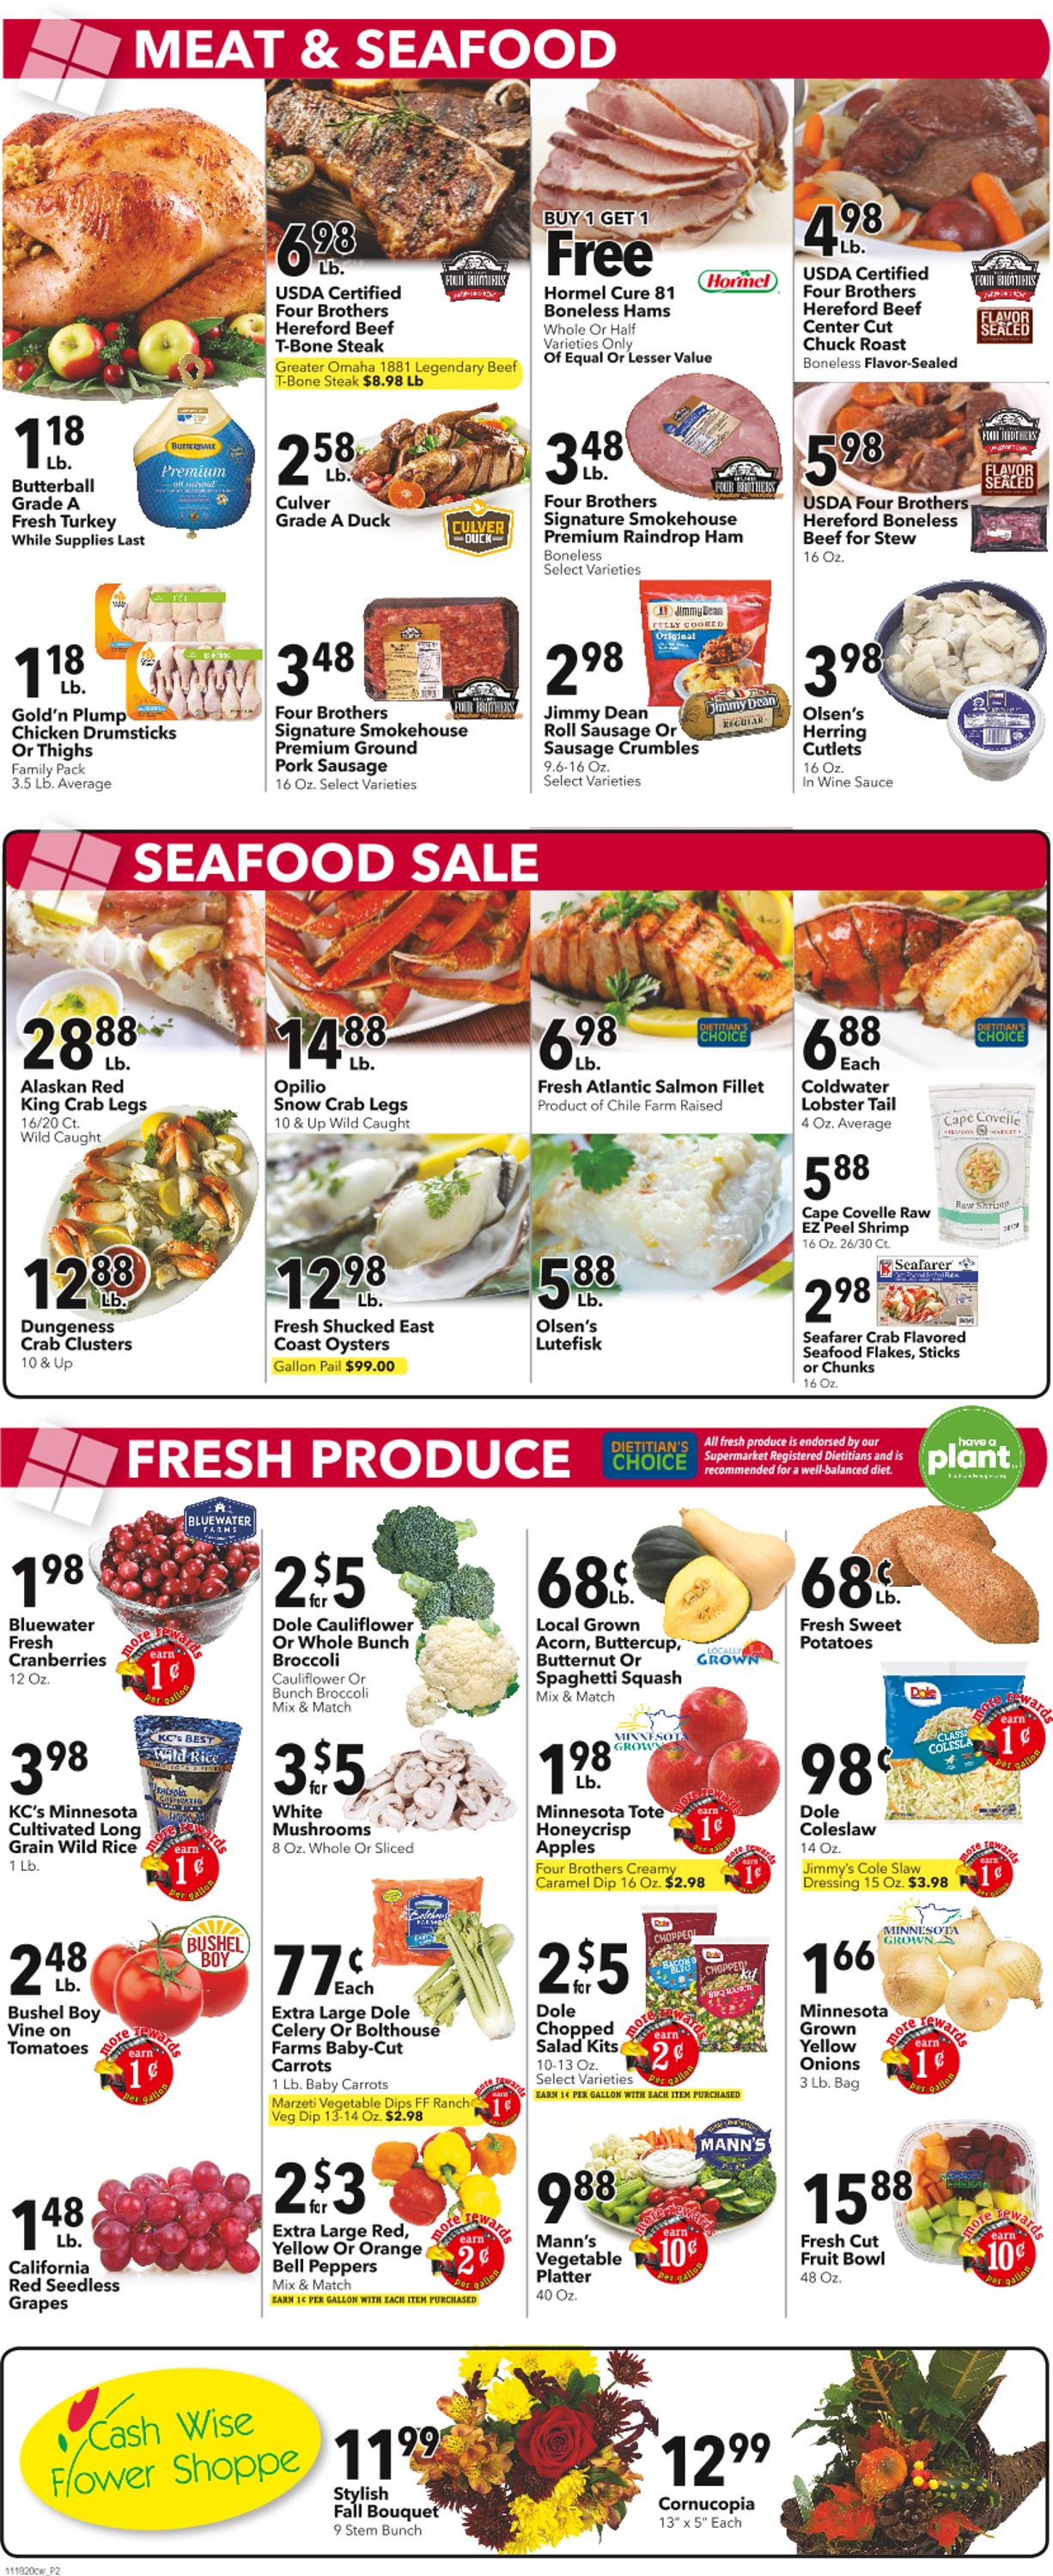 Cash Wise Weekly Ad Circular - valid 11/18-11/26/2020 (Page 2)